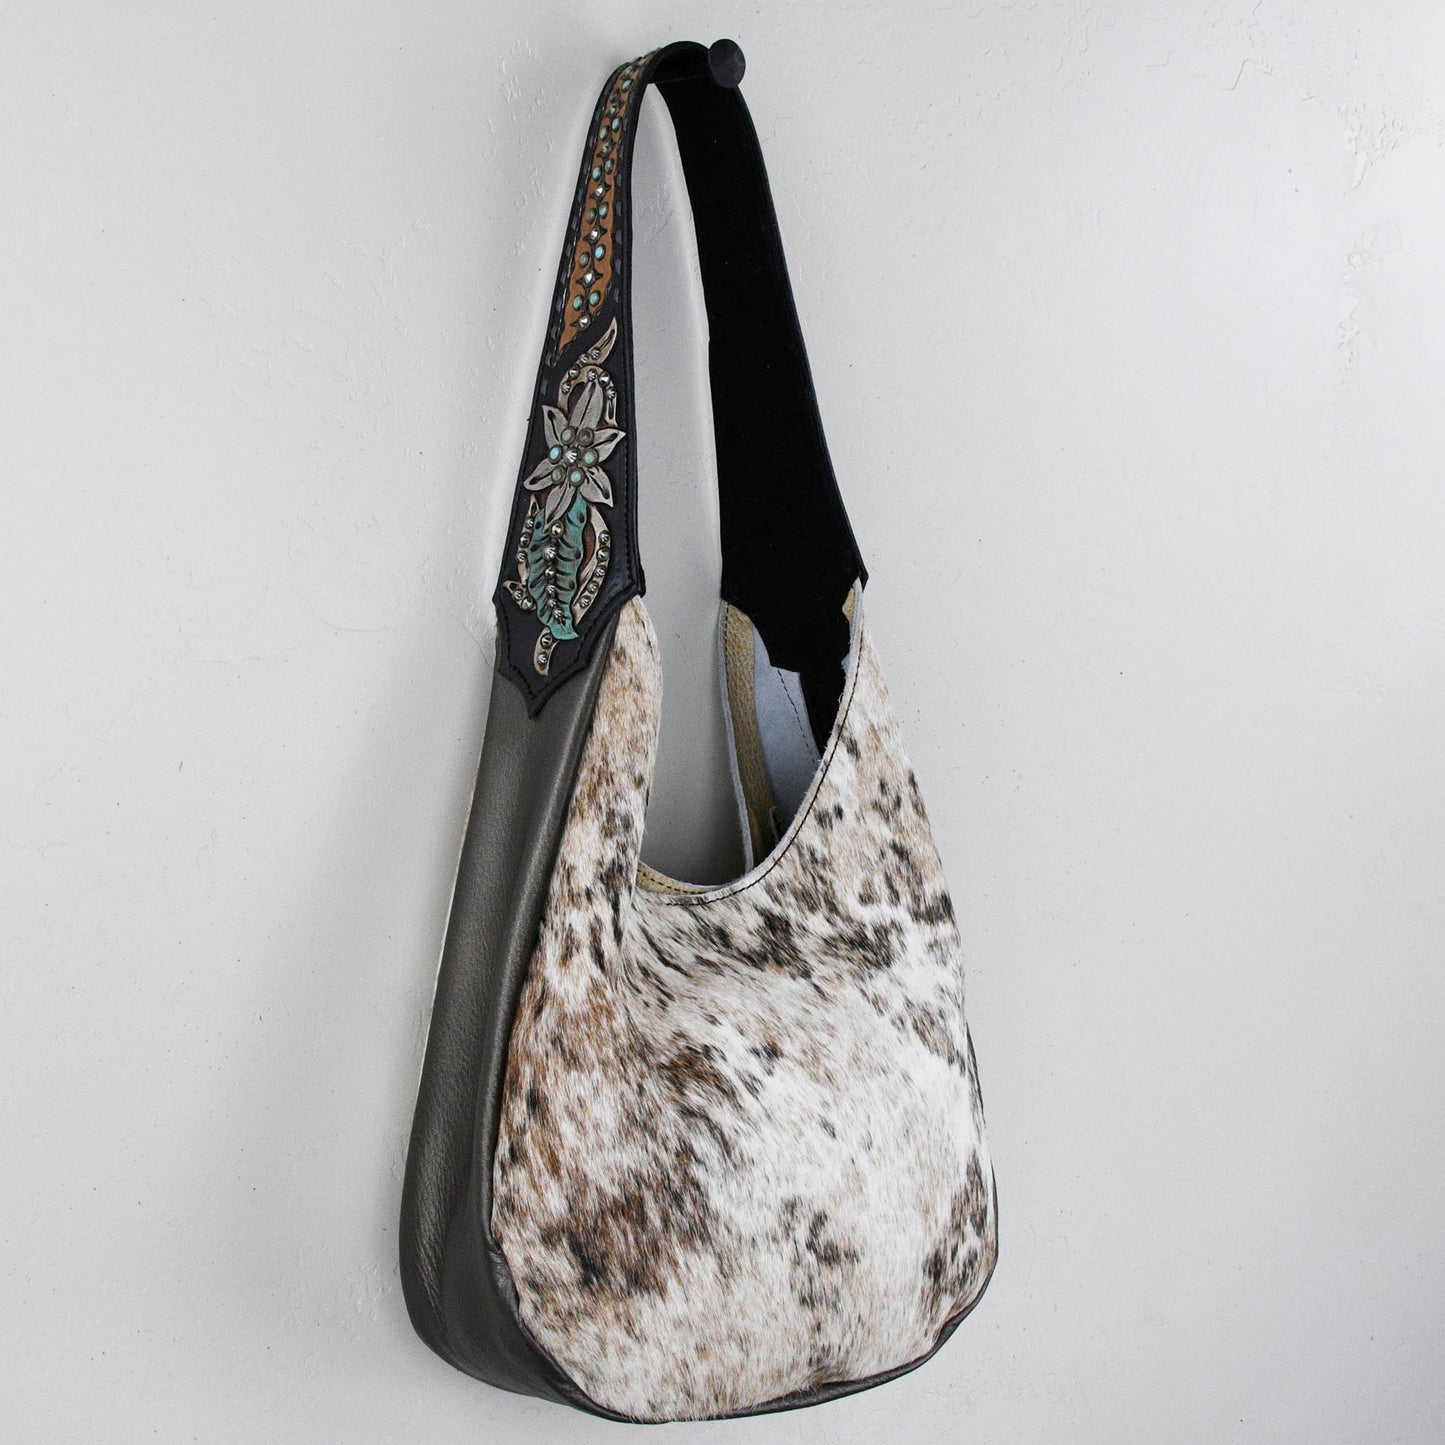 
                  
                    A gray and white Heritage Brand marilyn bag #33 with a decorative strap hanging on a white wall.
                  
                